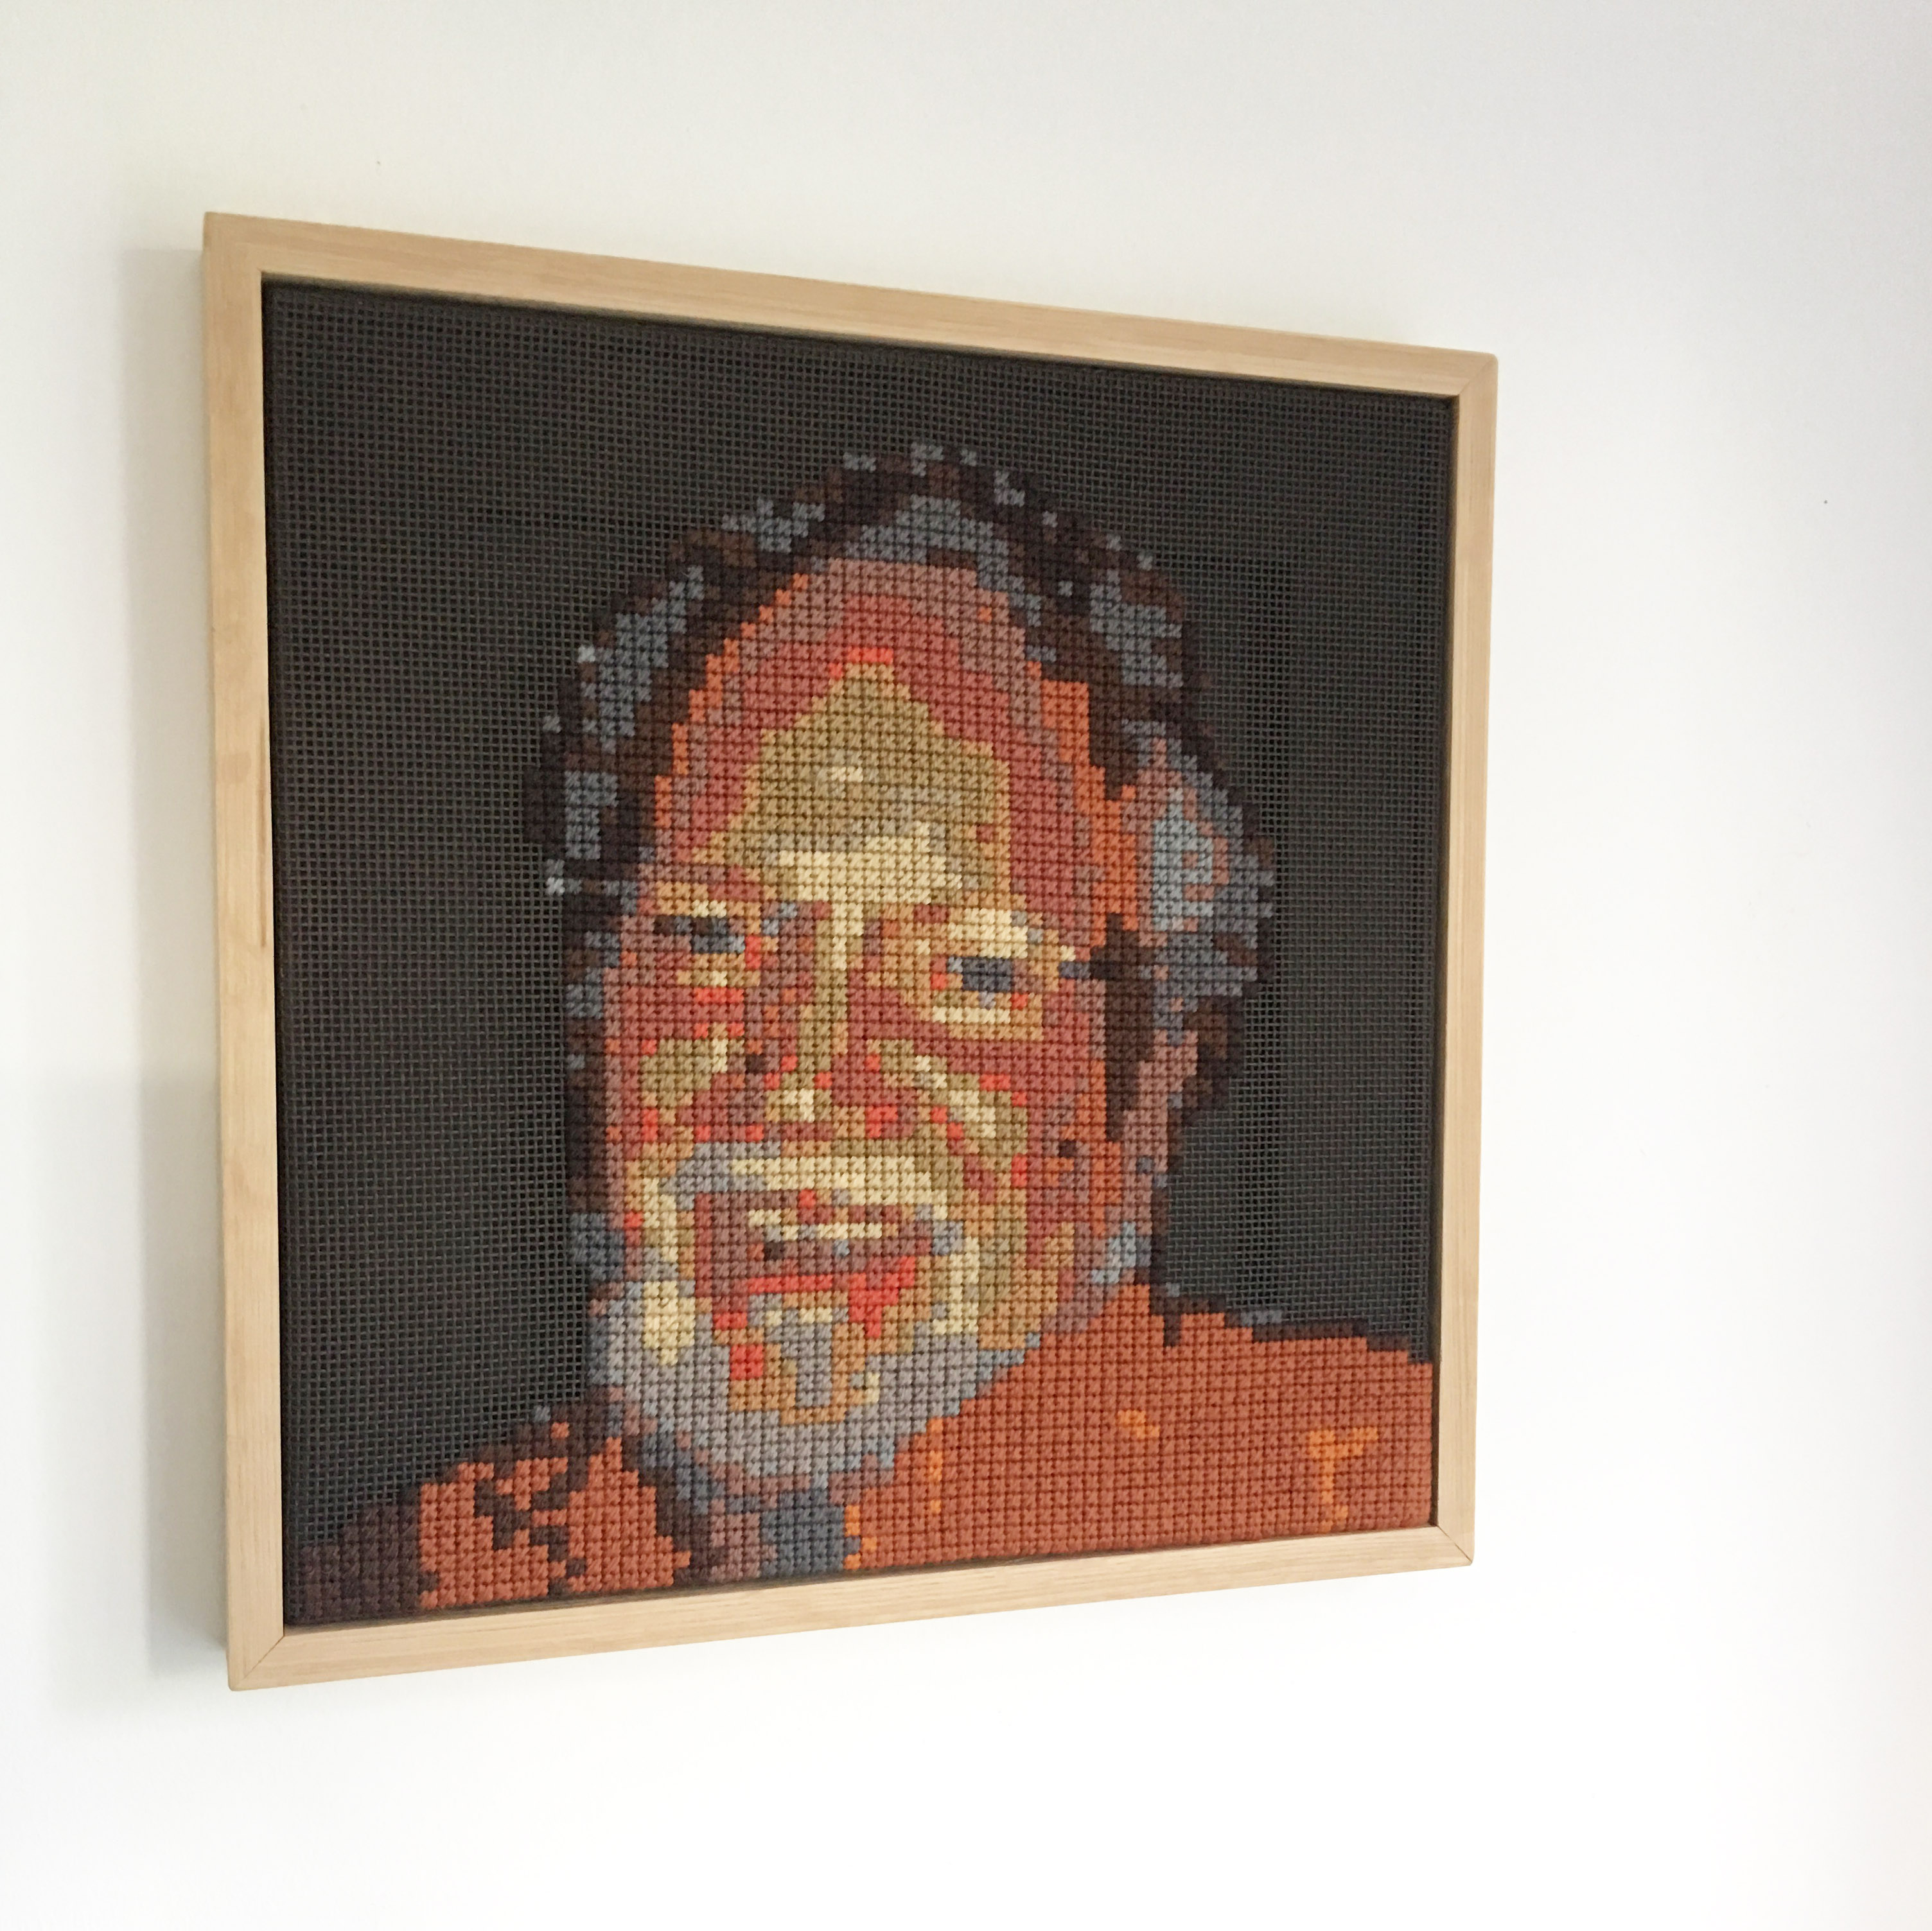 Zoe Gilbertson: My Dad at 70 years old, 2016, oak frame, tapestry canvas, spray paint, tapestry wool using a made up stitch to create a pixel effect.